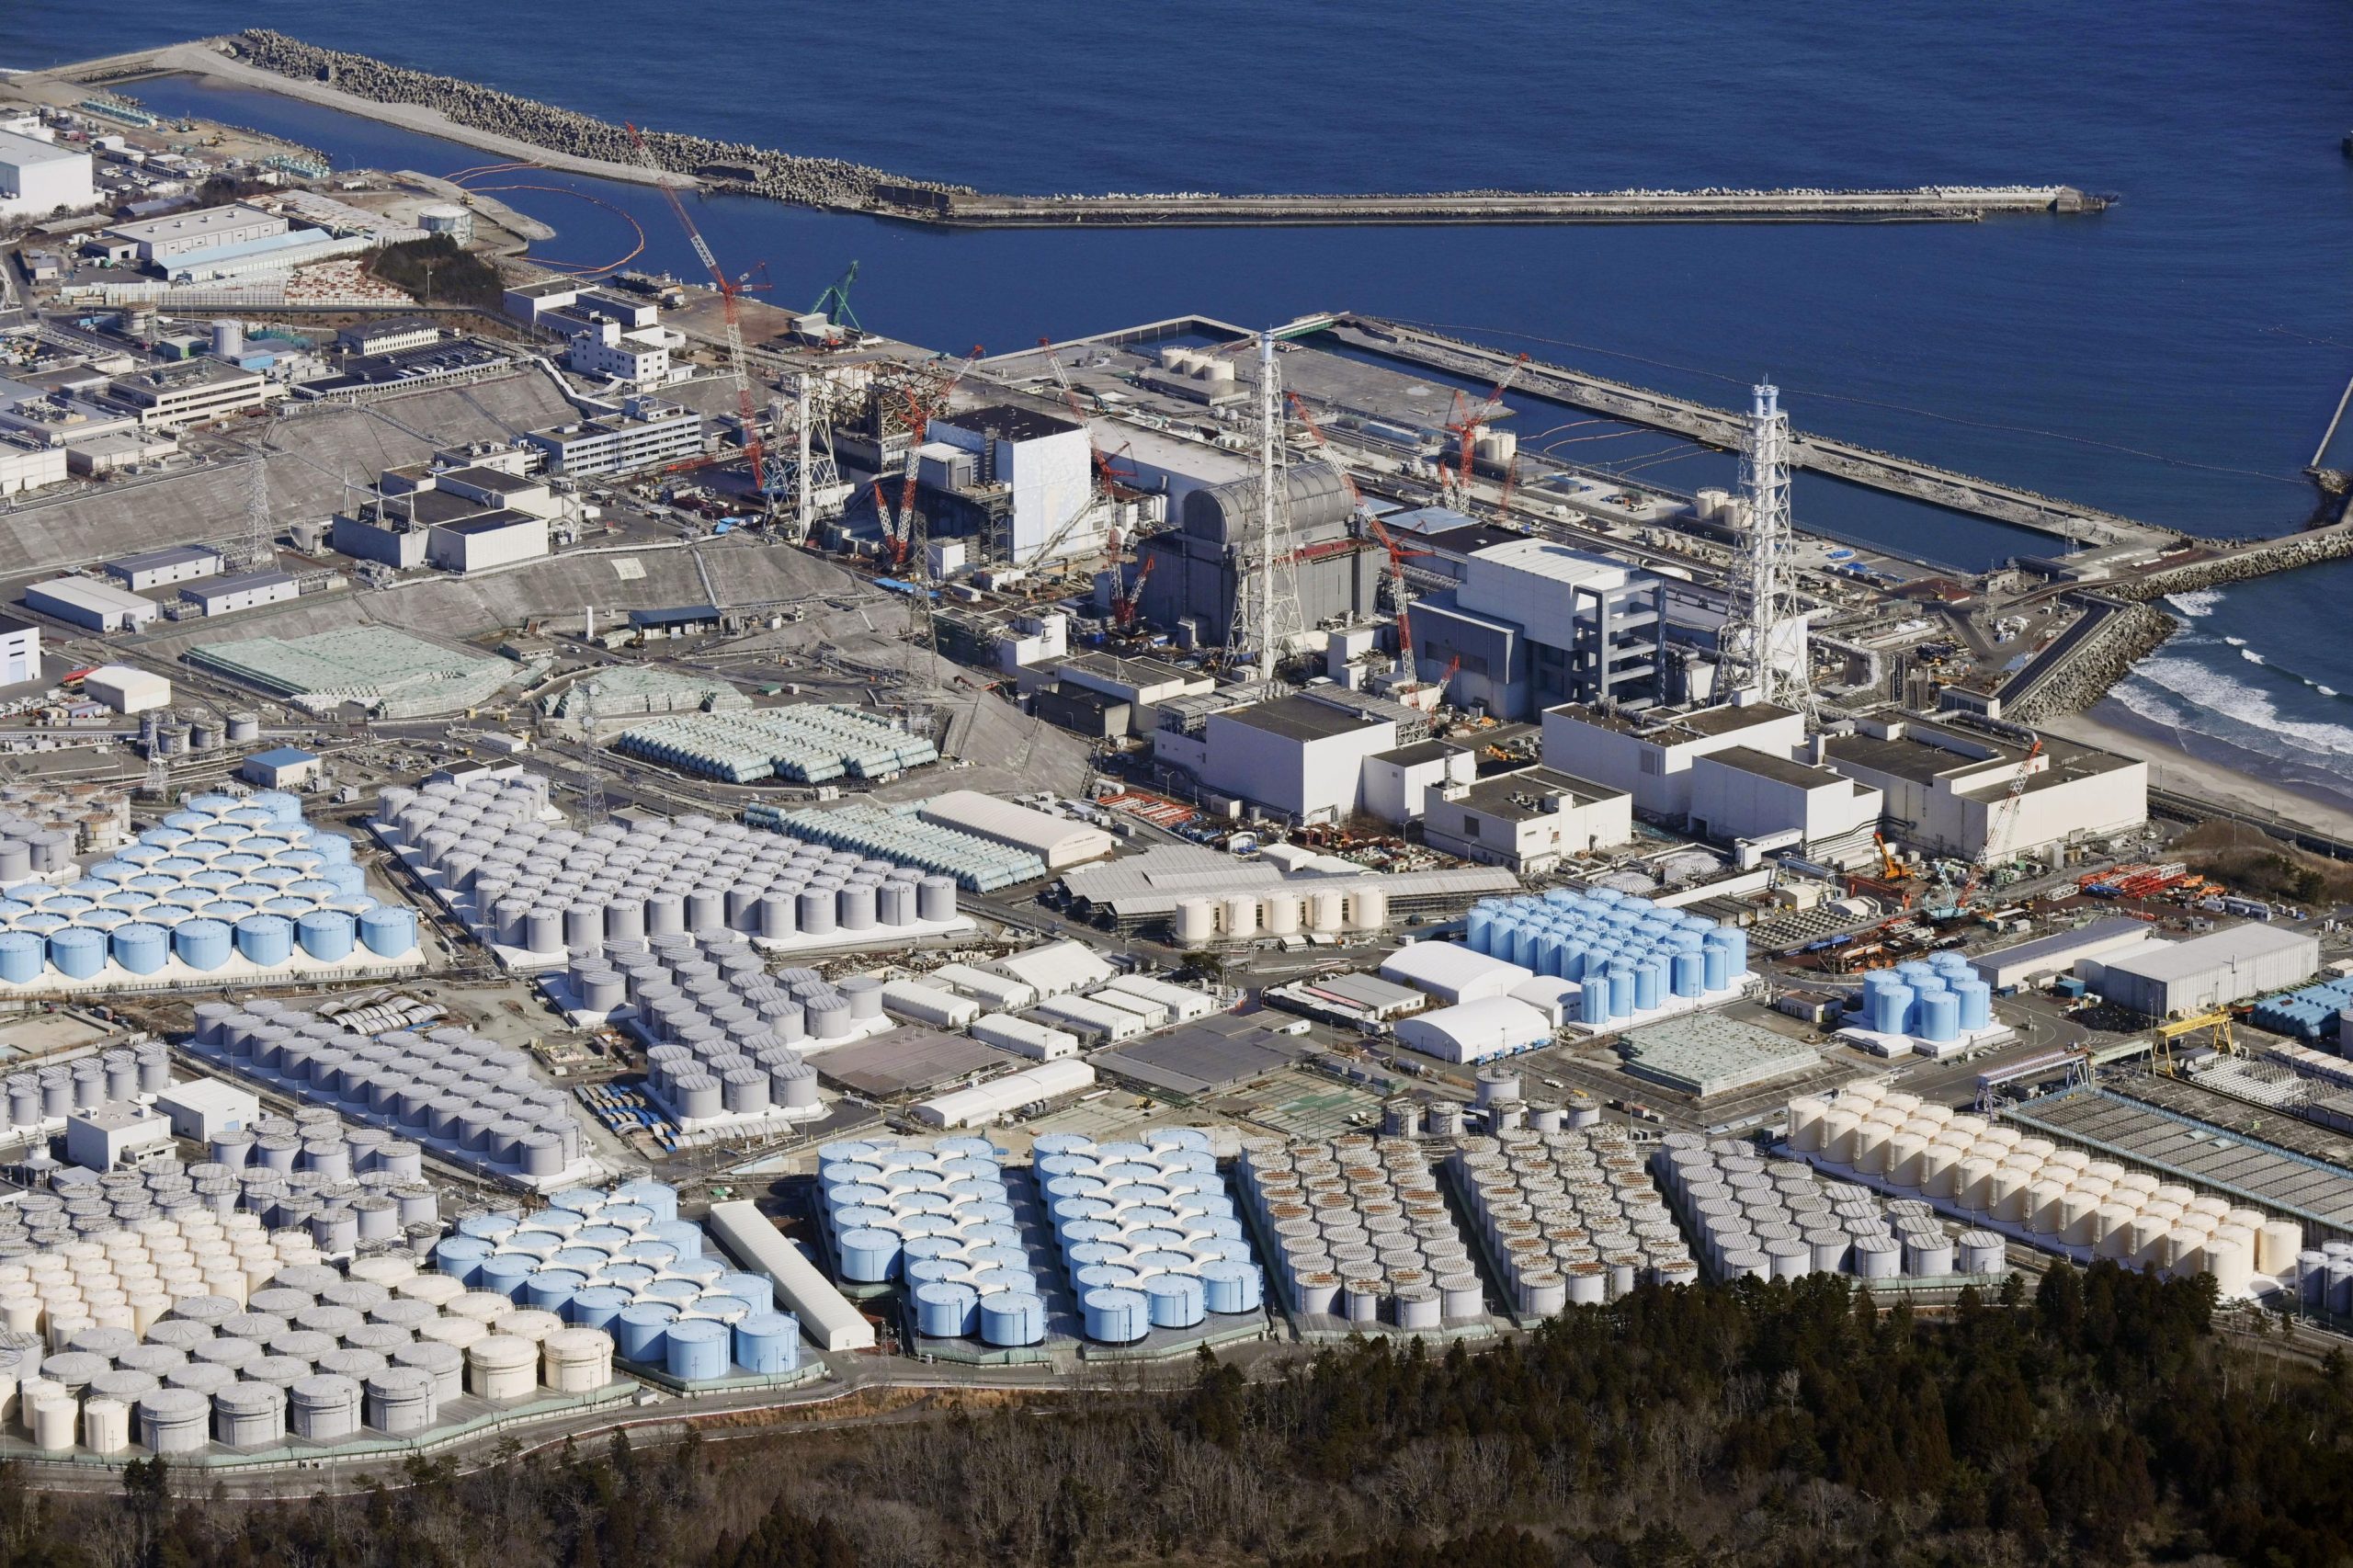 Reconstruction in Fukushima: Nuclear Plant Treated Water Release Conforms to International Safety Standards, Experts and Locals Weigh In | JAPAN Forward